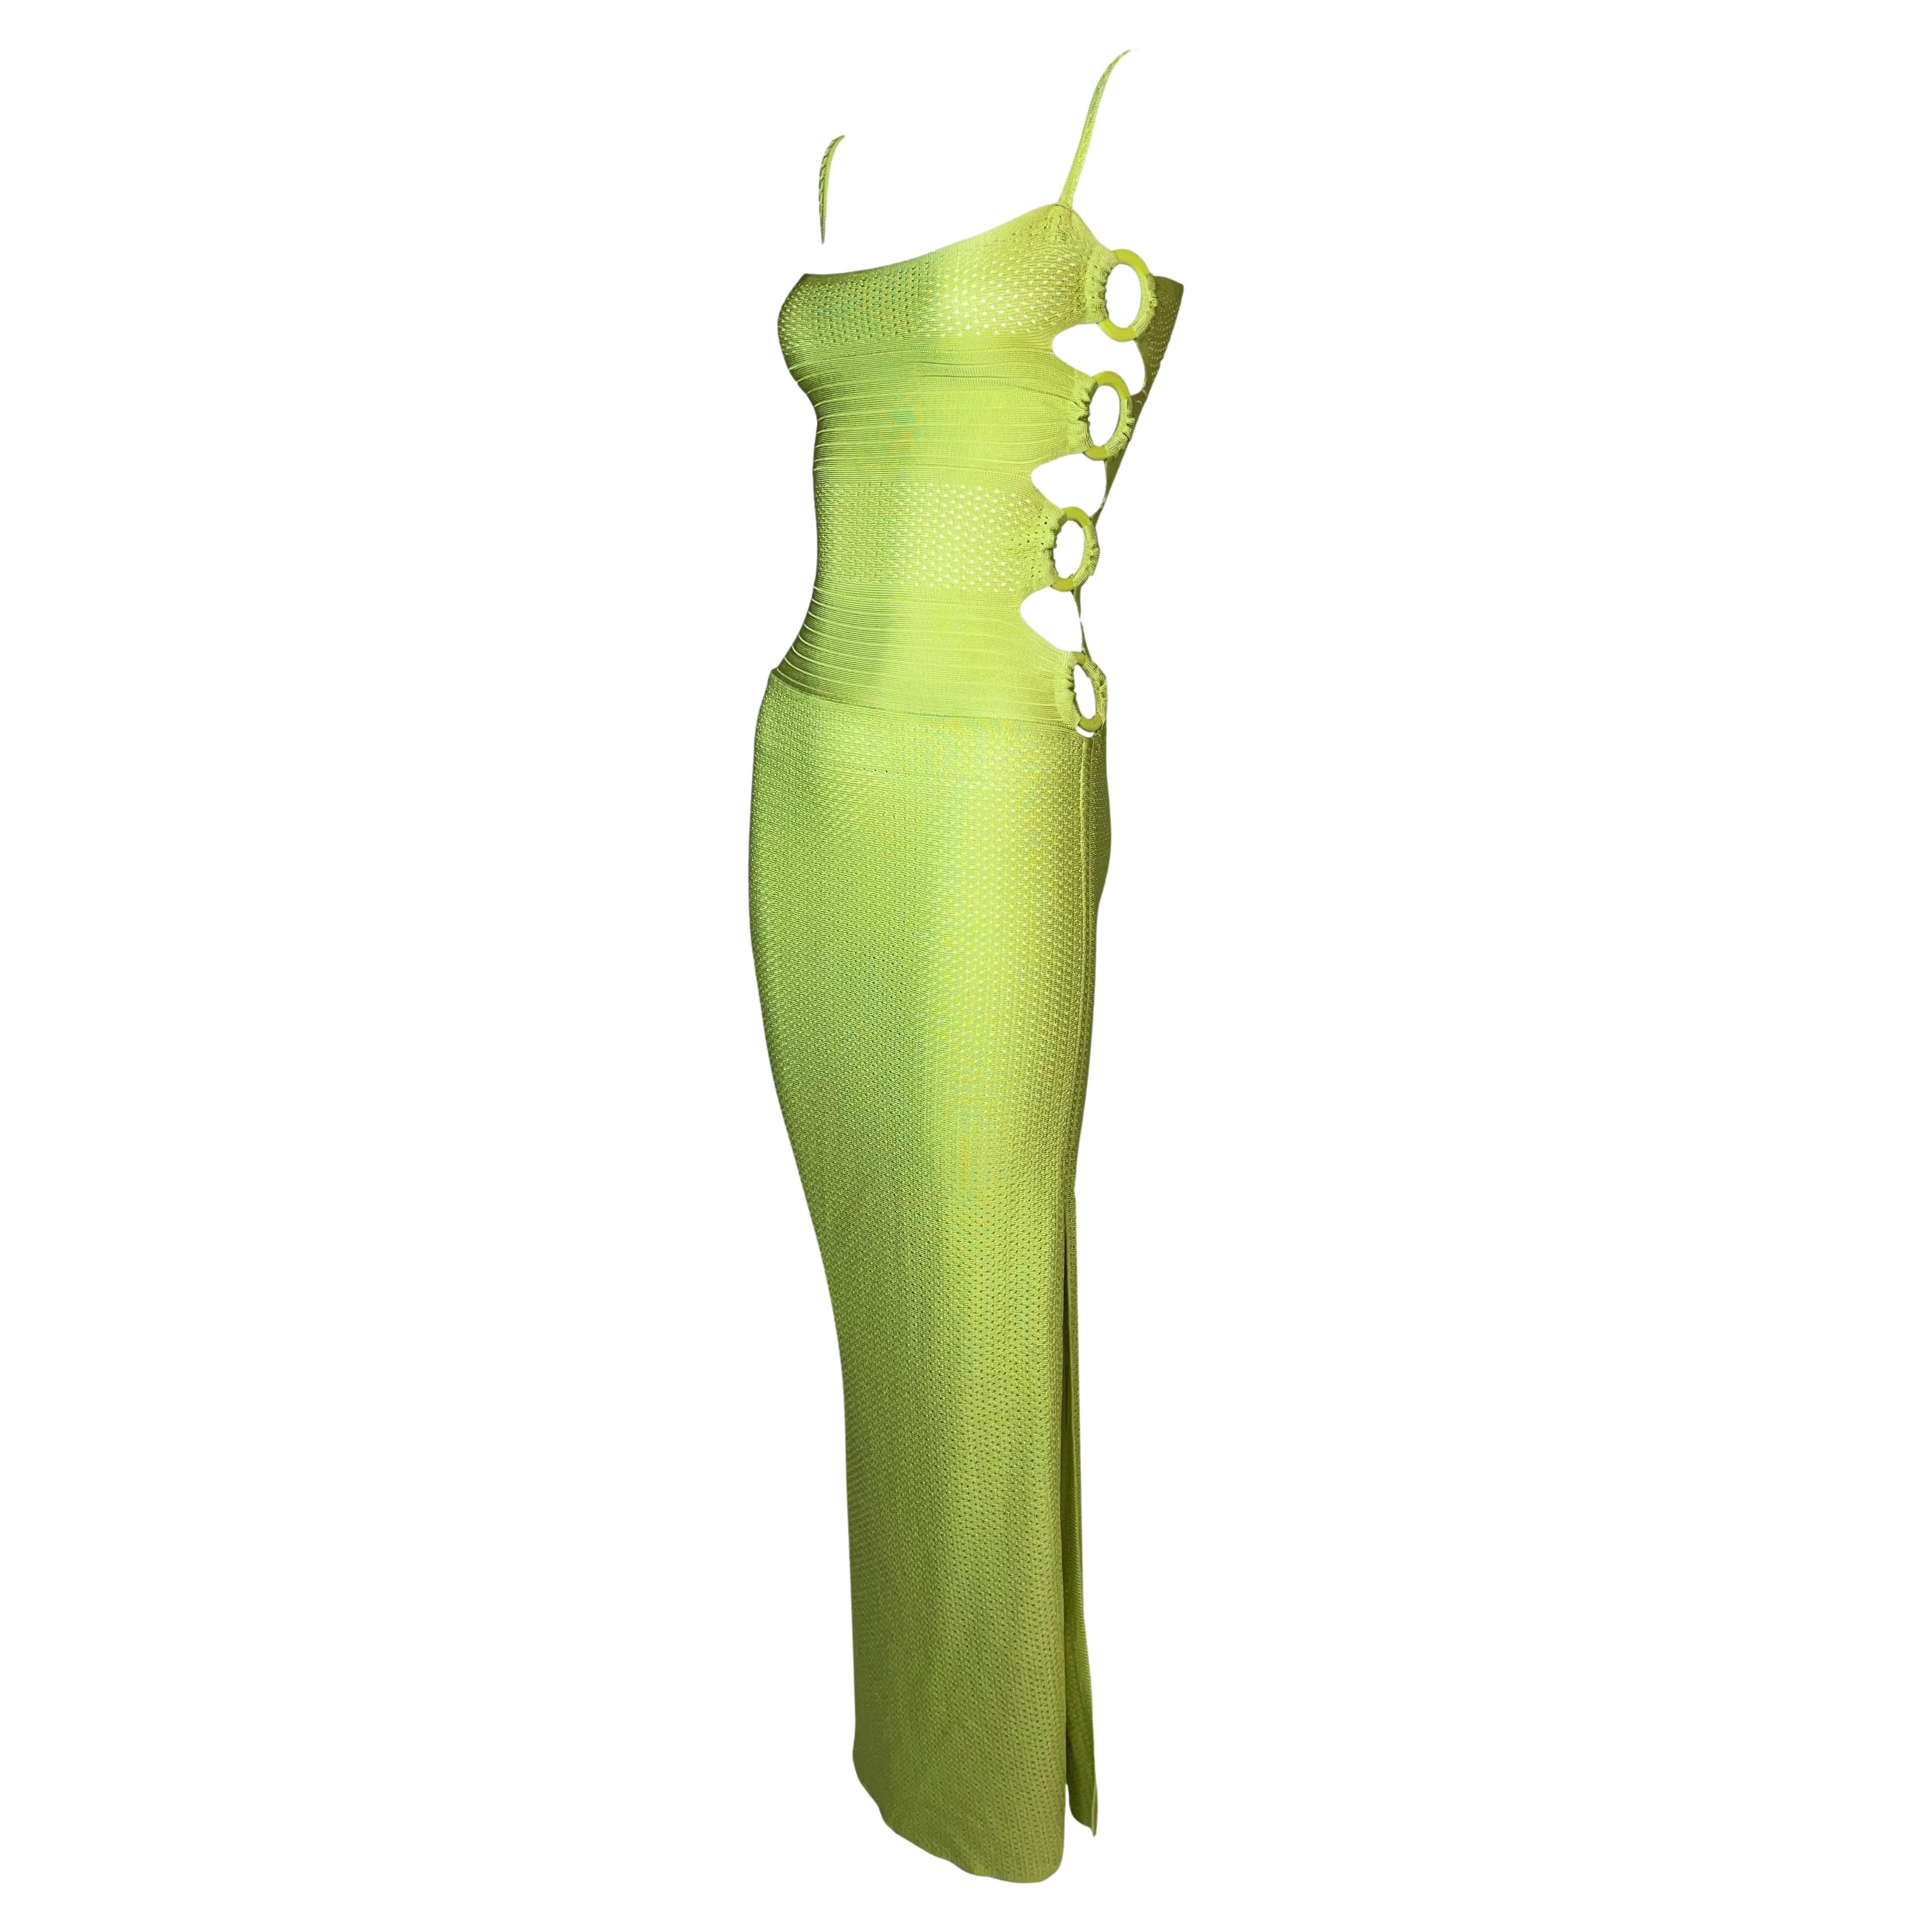 S/S 2002 Christian Dior John Galliano Lime Green Bandage Cut-Out ...